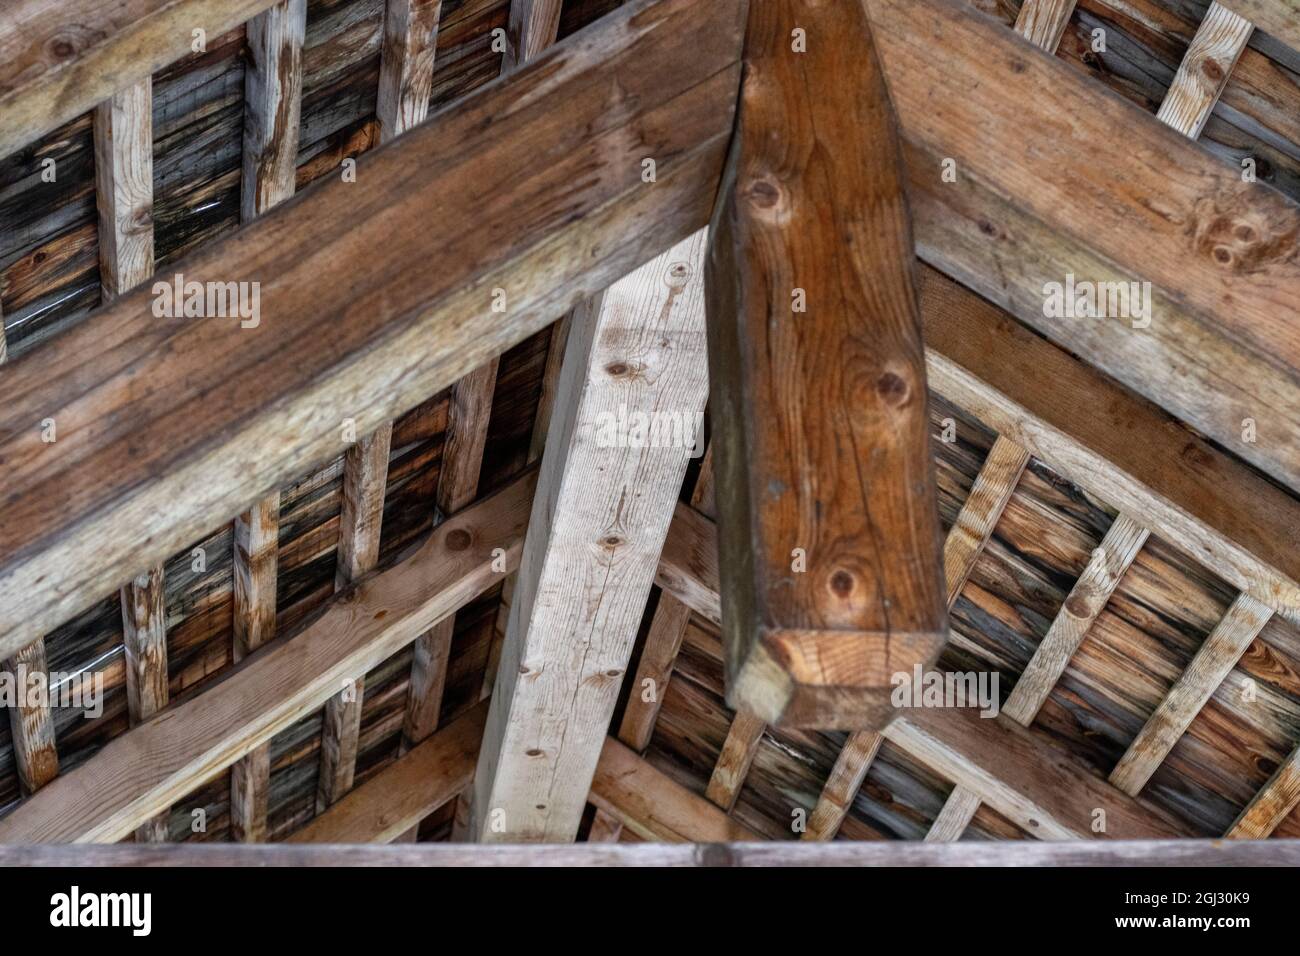 Particular roof of a wooden bridge. Stock Photo